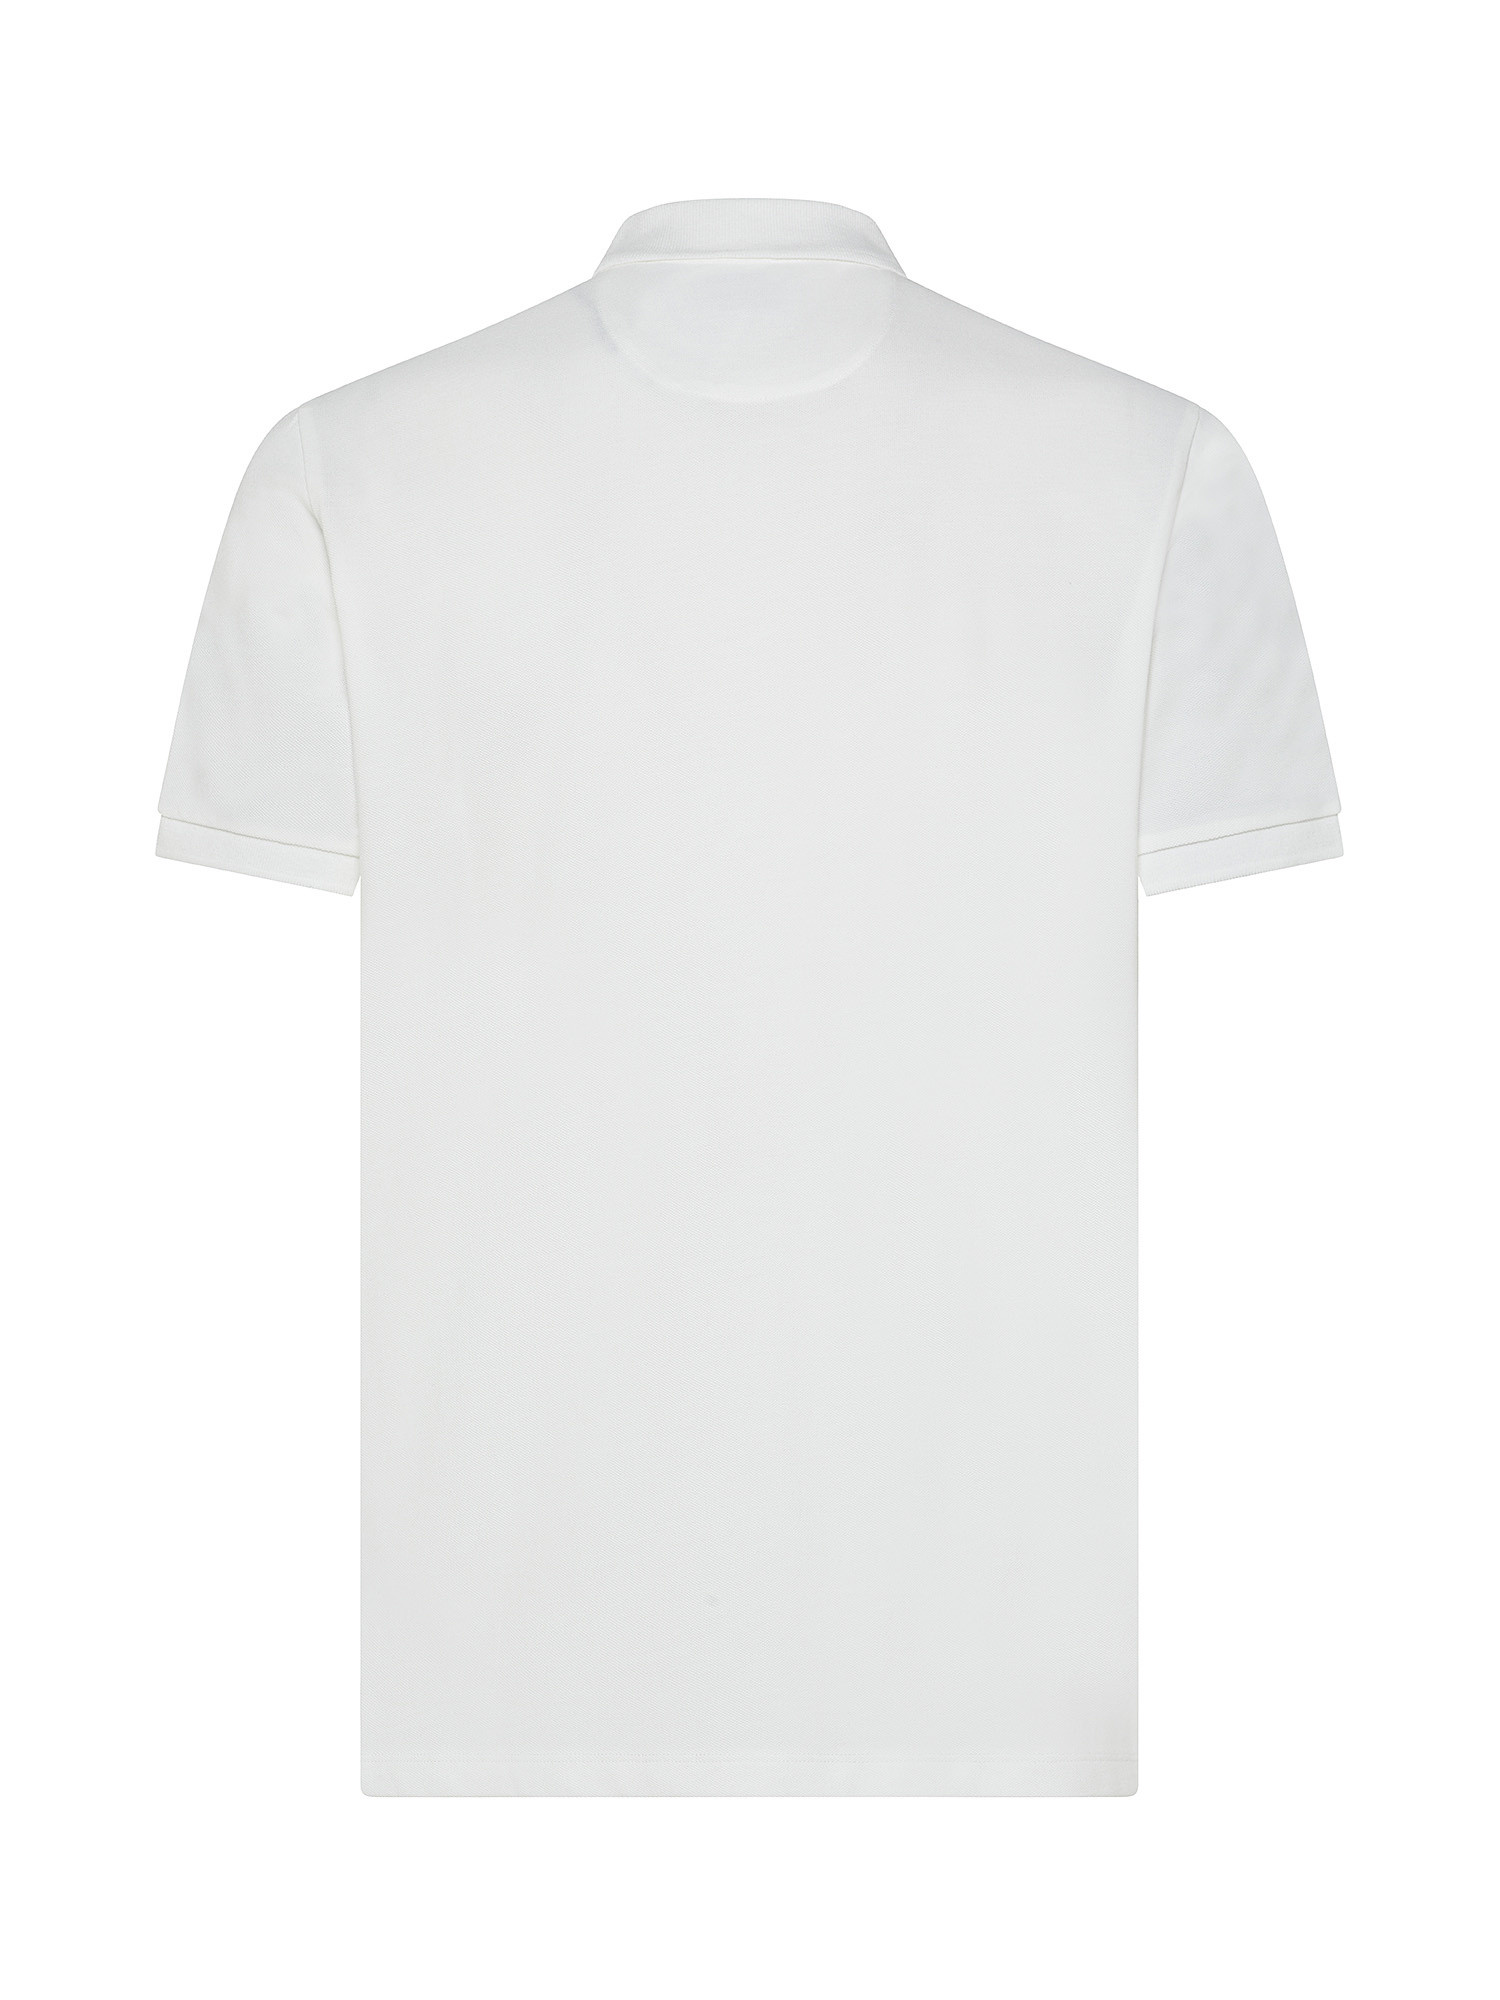 Luca D'Altieri - Polo in pure cotton, White, large image number 1